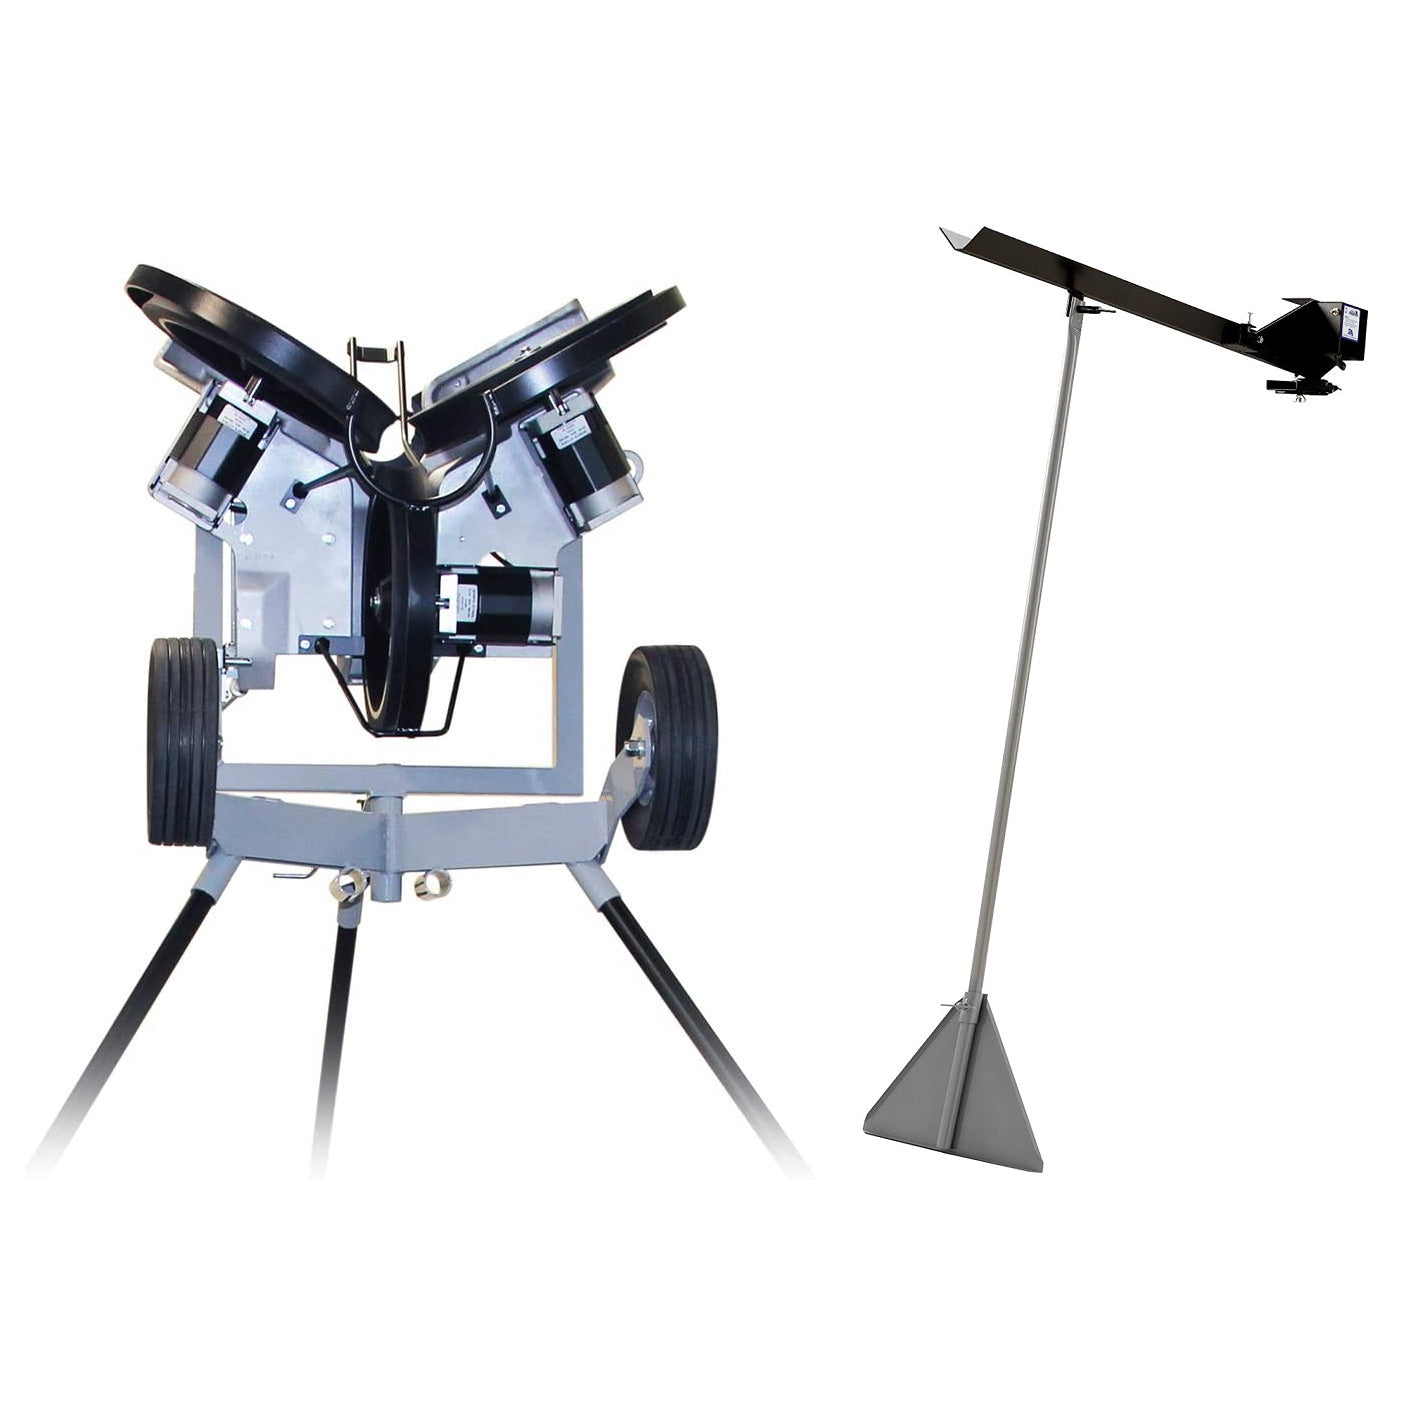 Hack Attack 3 Wheel Pitching Machine + Solo Ball Feeder Package Deal